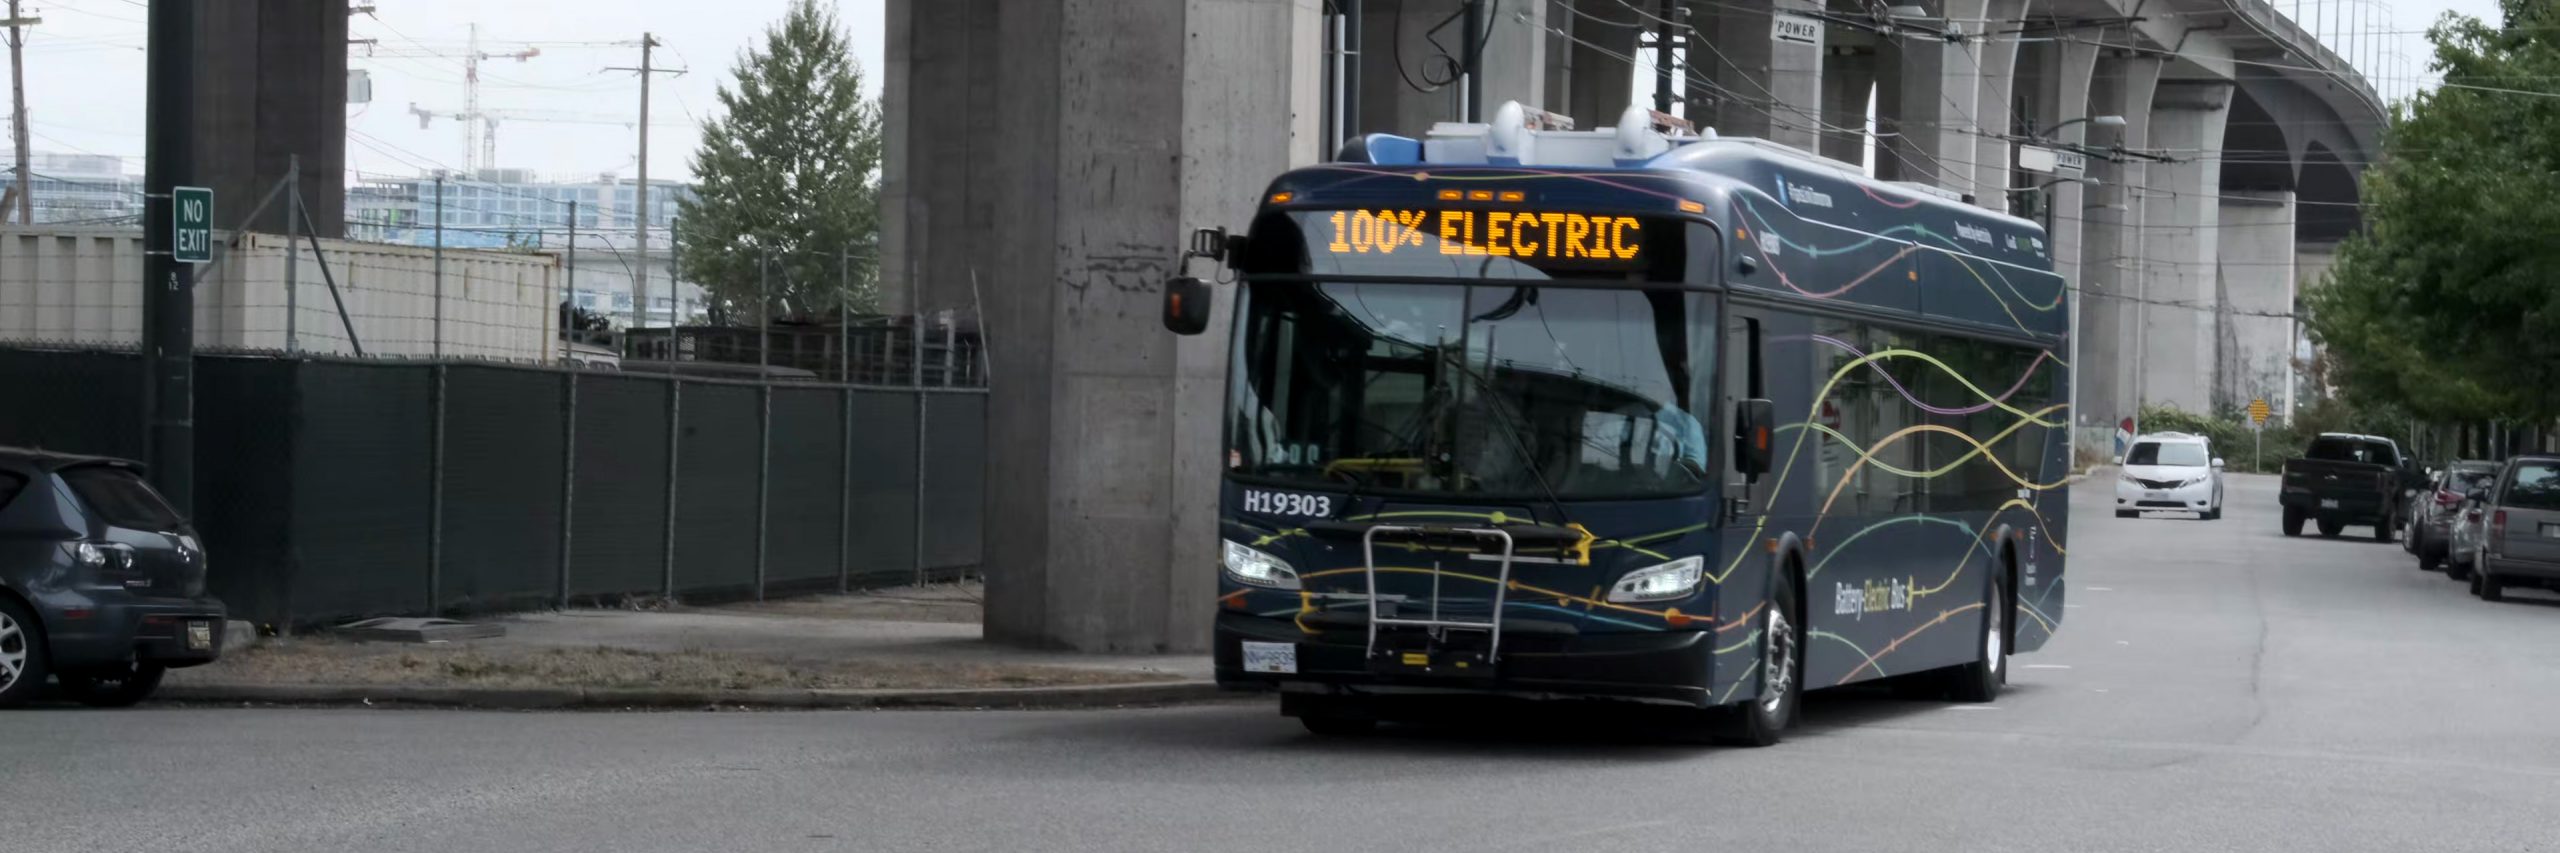 A battery-electric bus with 100 per cent electric on its destination sign